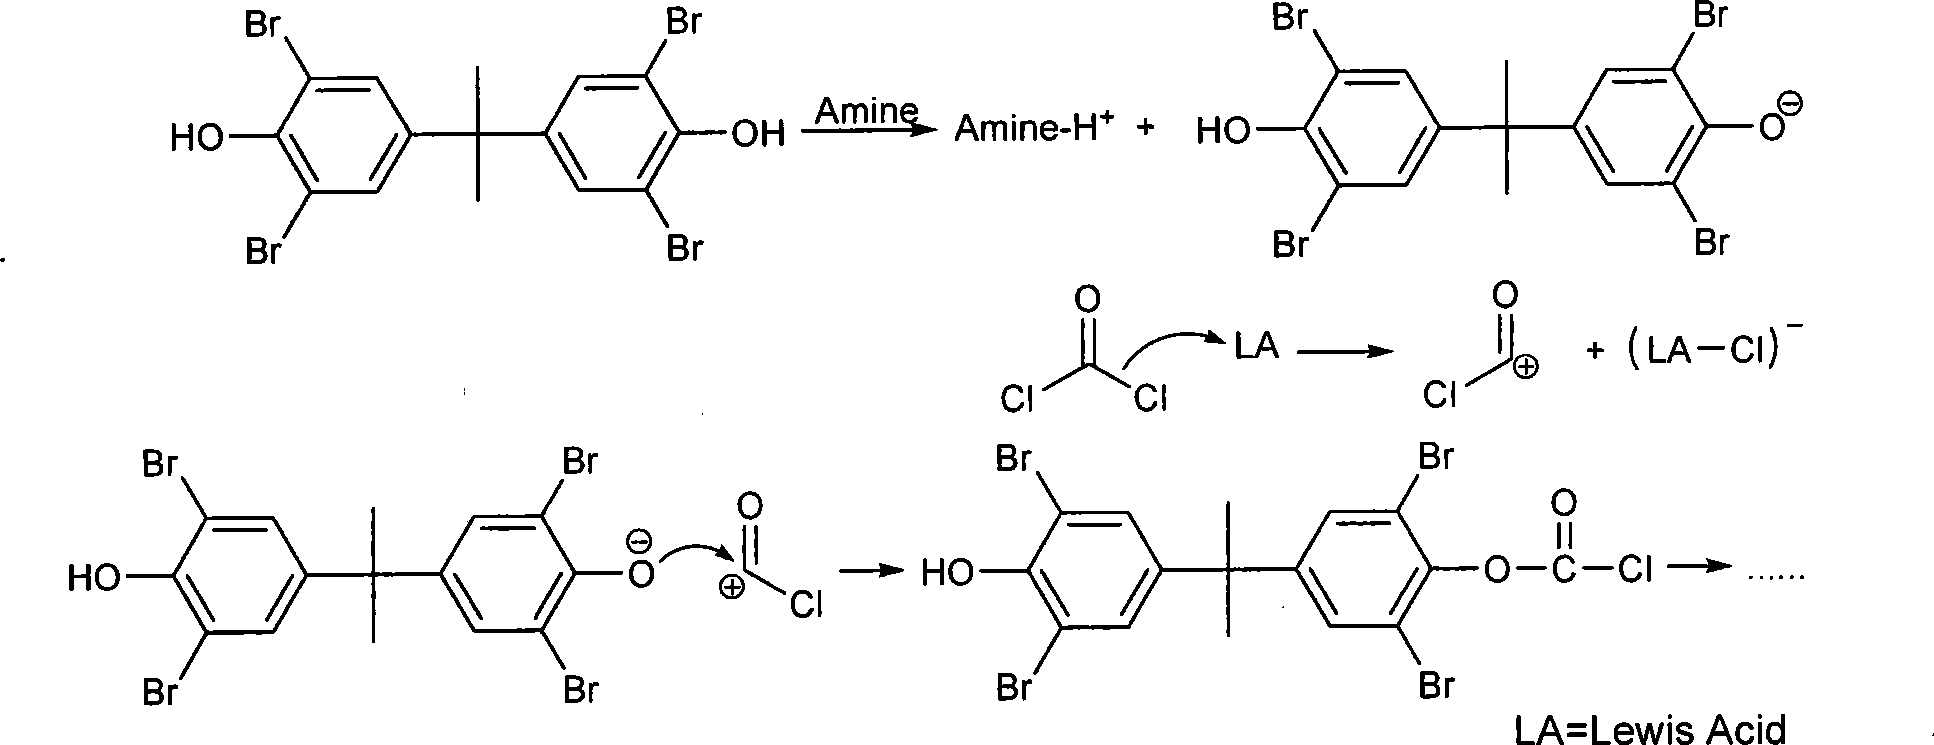 Preparation method for synthesizing brominated polycarbonate